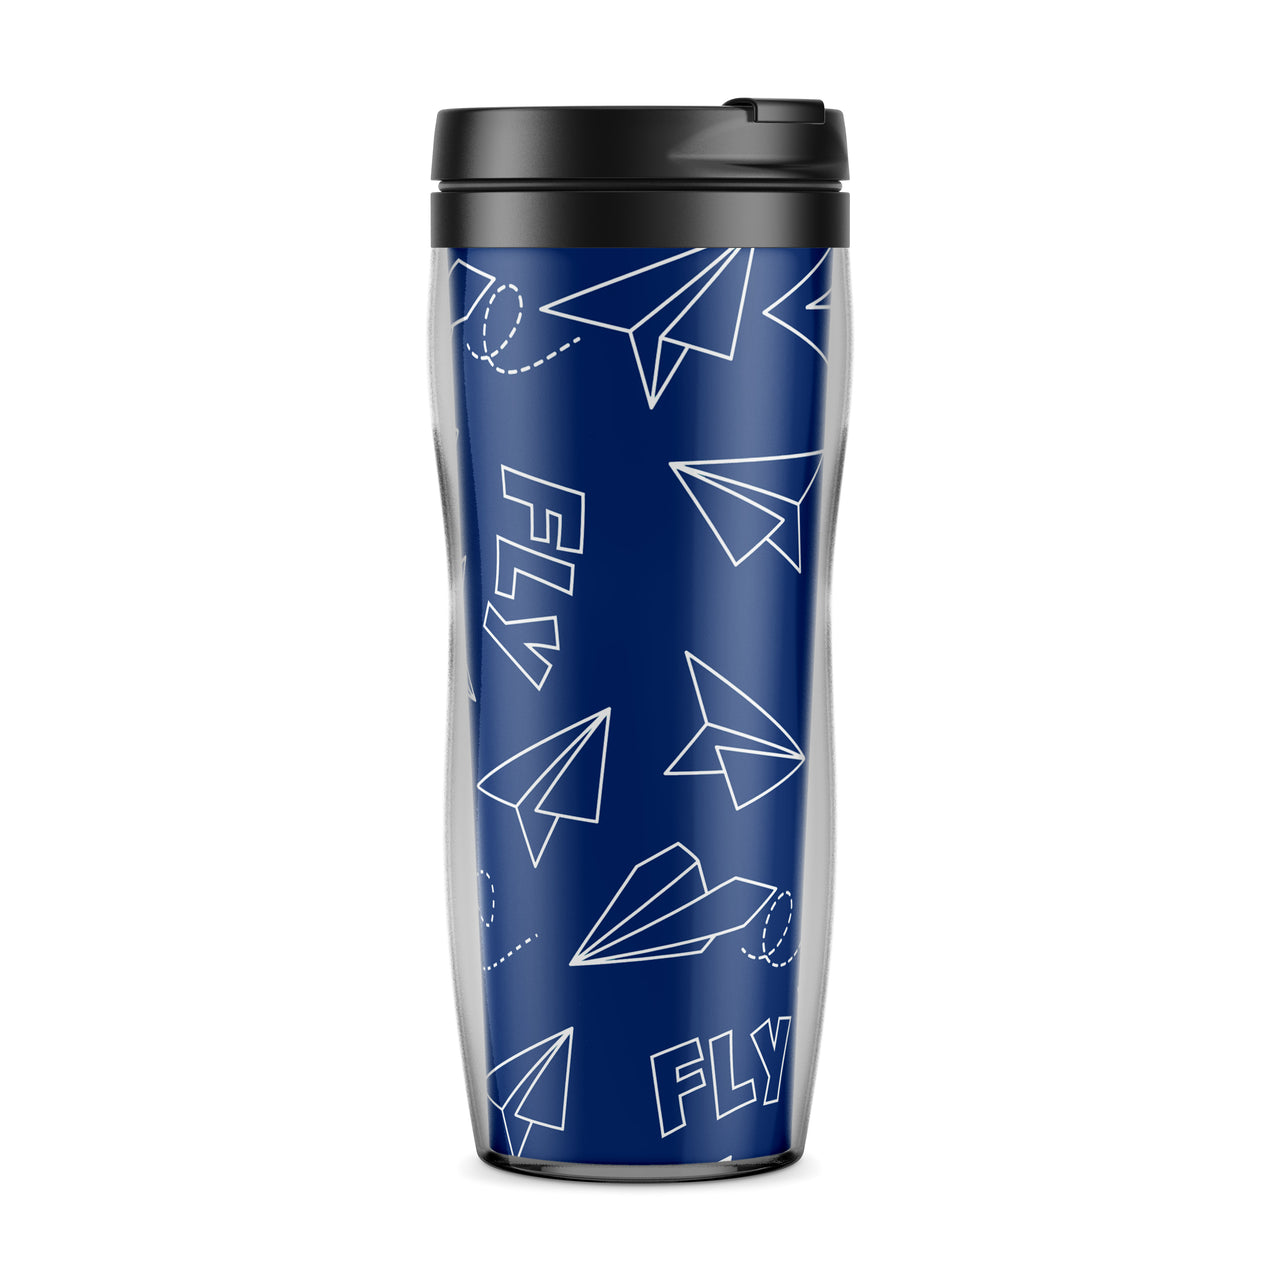 Paper Airplane & Fly-Blue Designed Travel Mugs